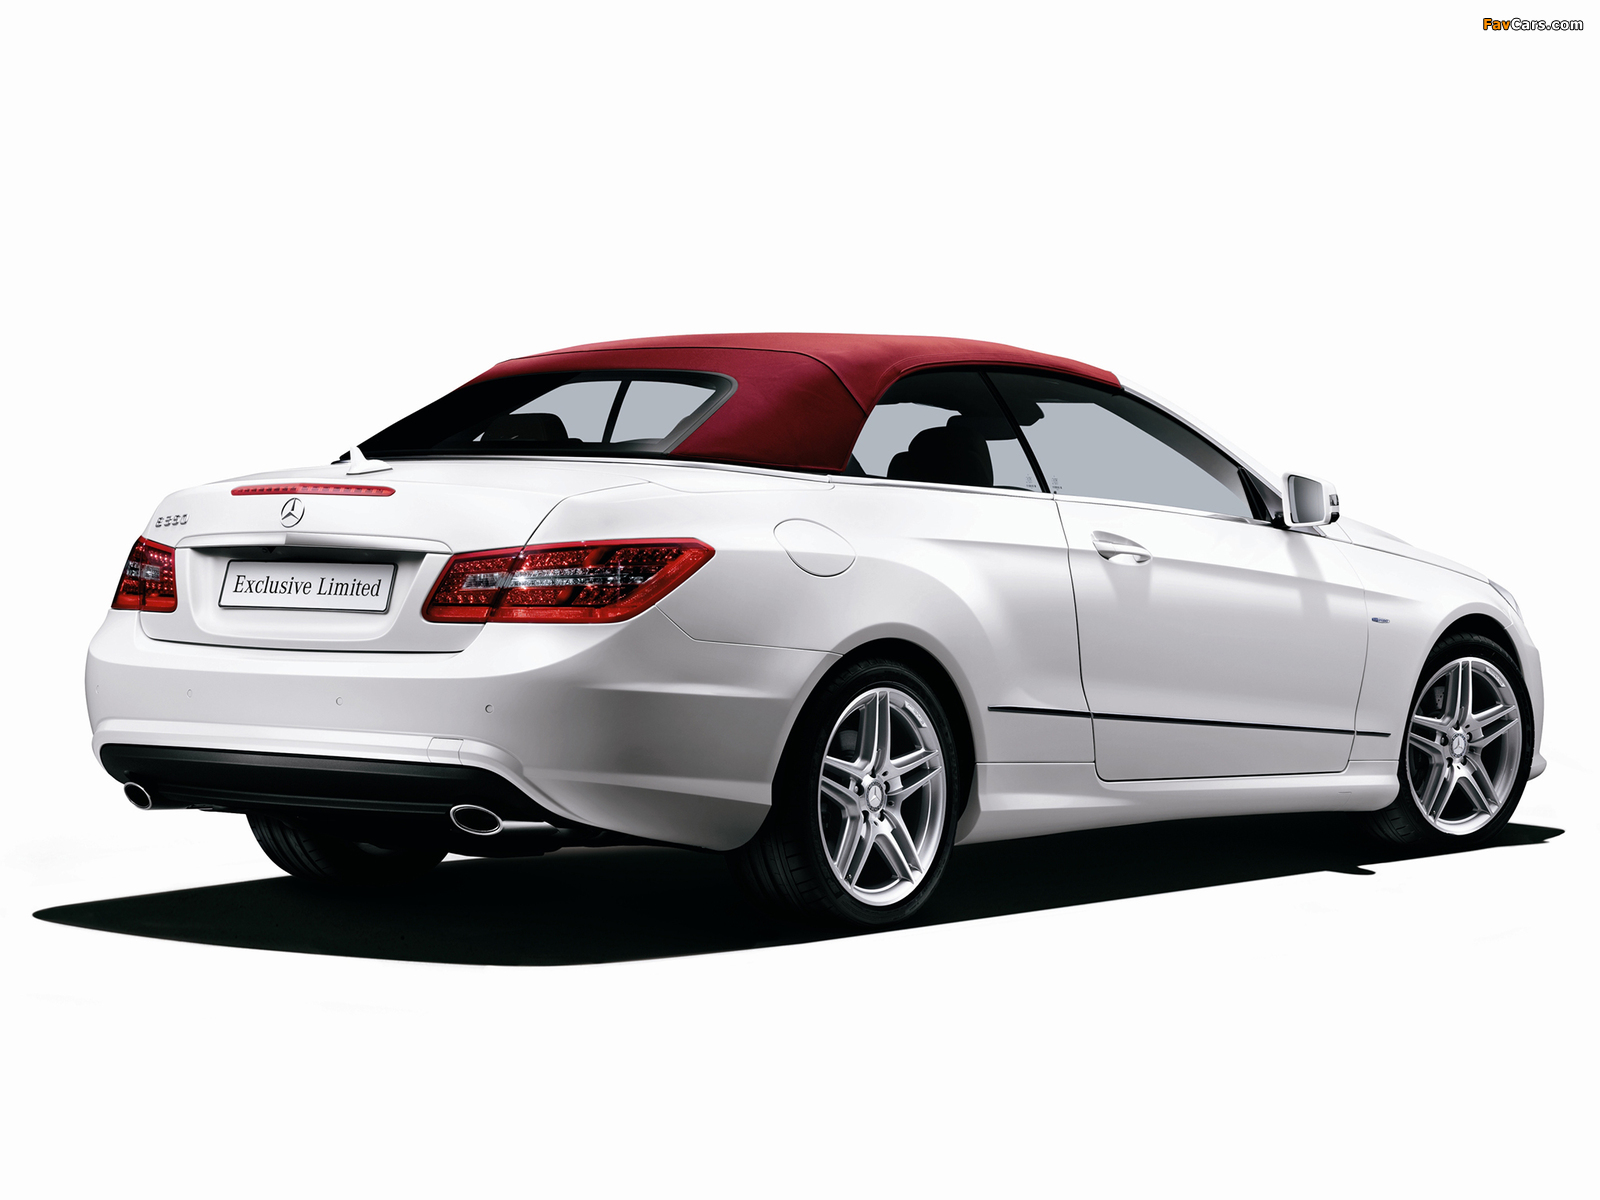 Mercedes-Benz E 350 BlueEfficiency Cabrio Exclusive Limited (A207) 2012 wallpapers (1600 x 1200)